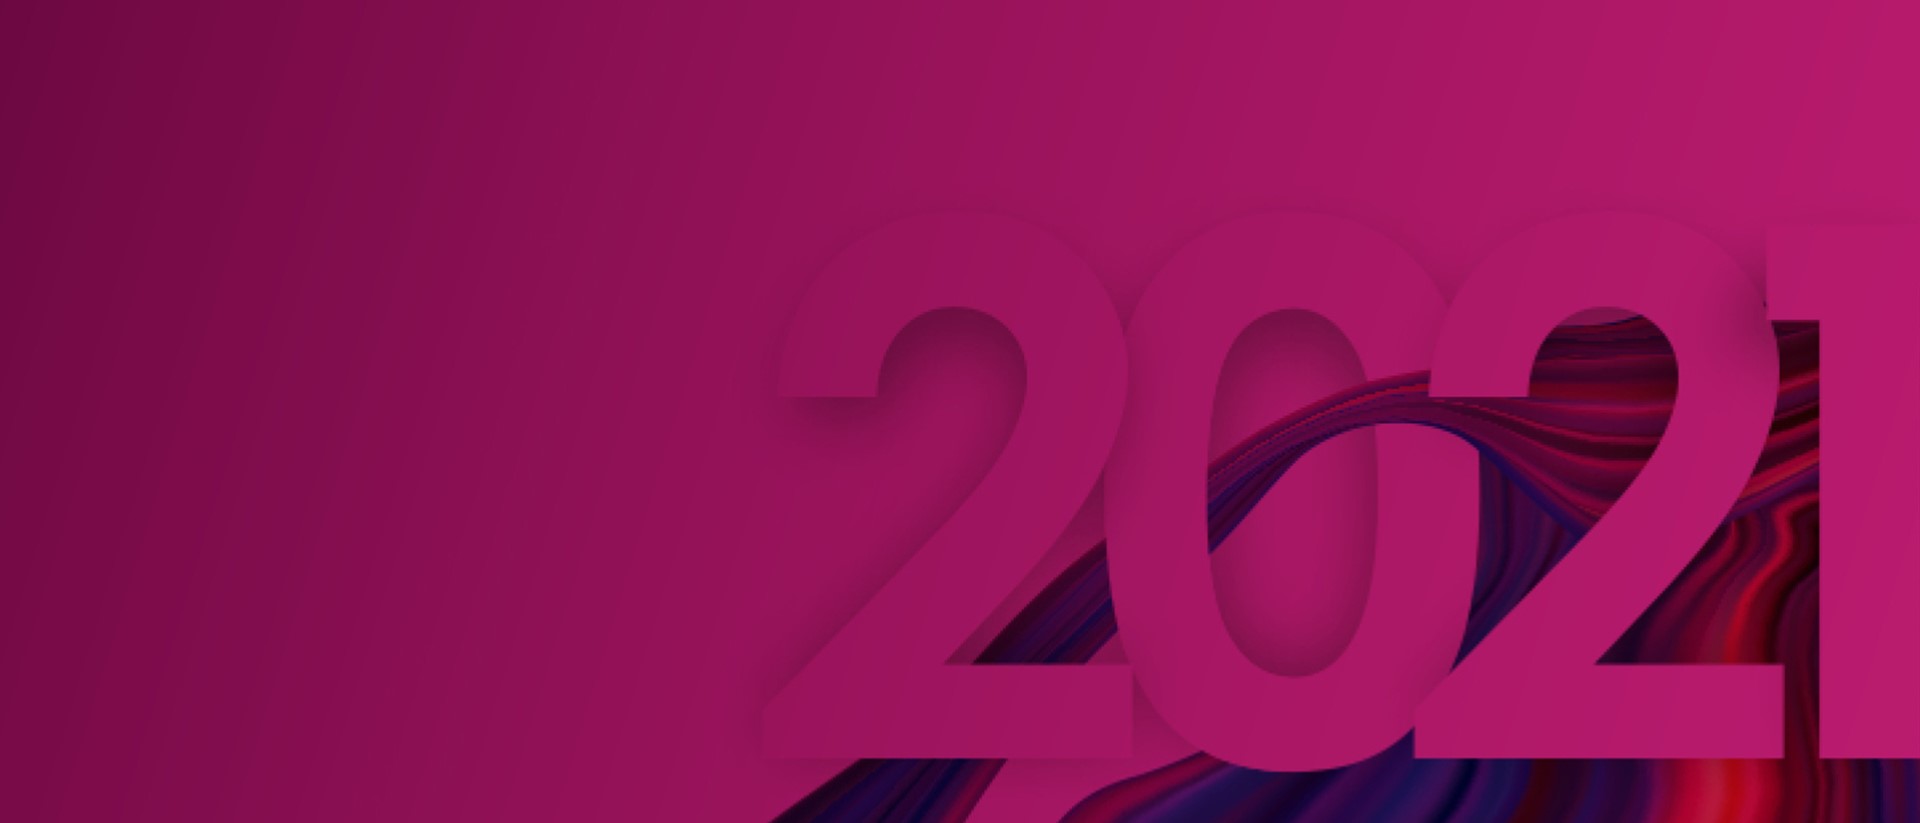 Image for the 2021 Webinar series in purple